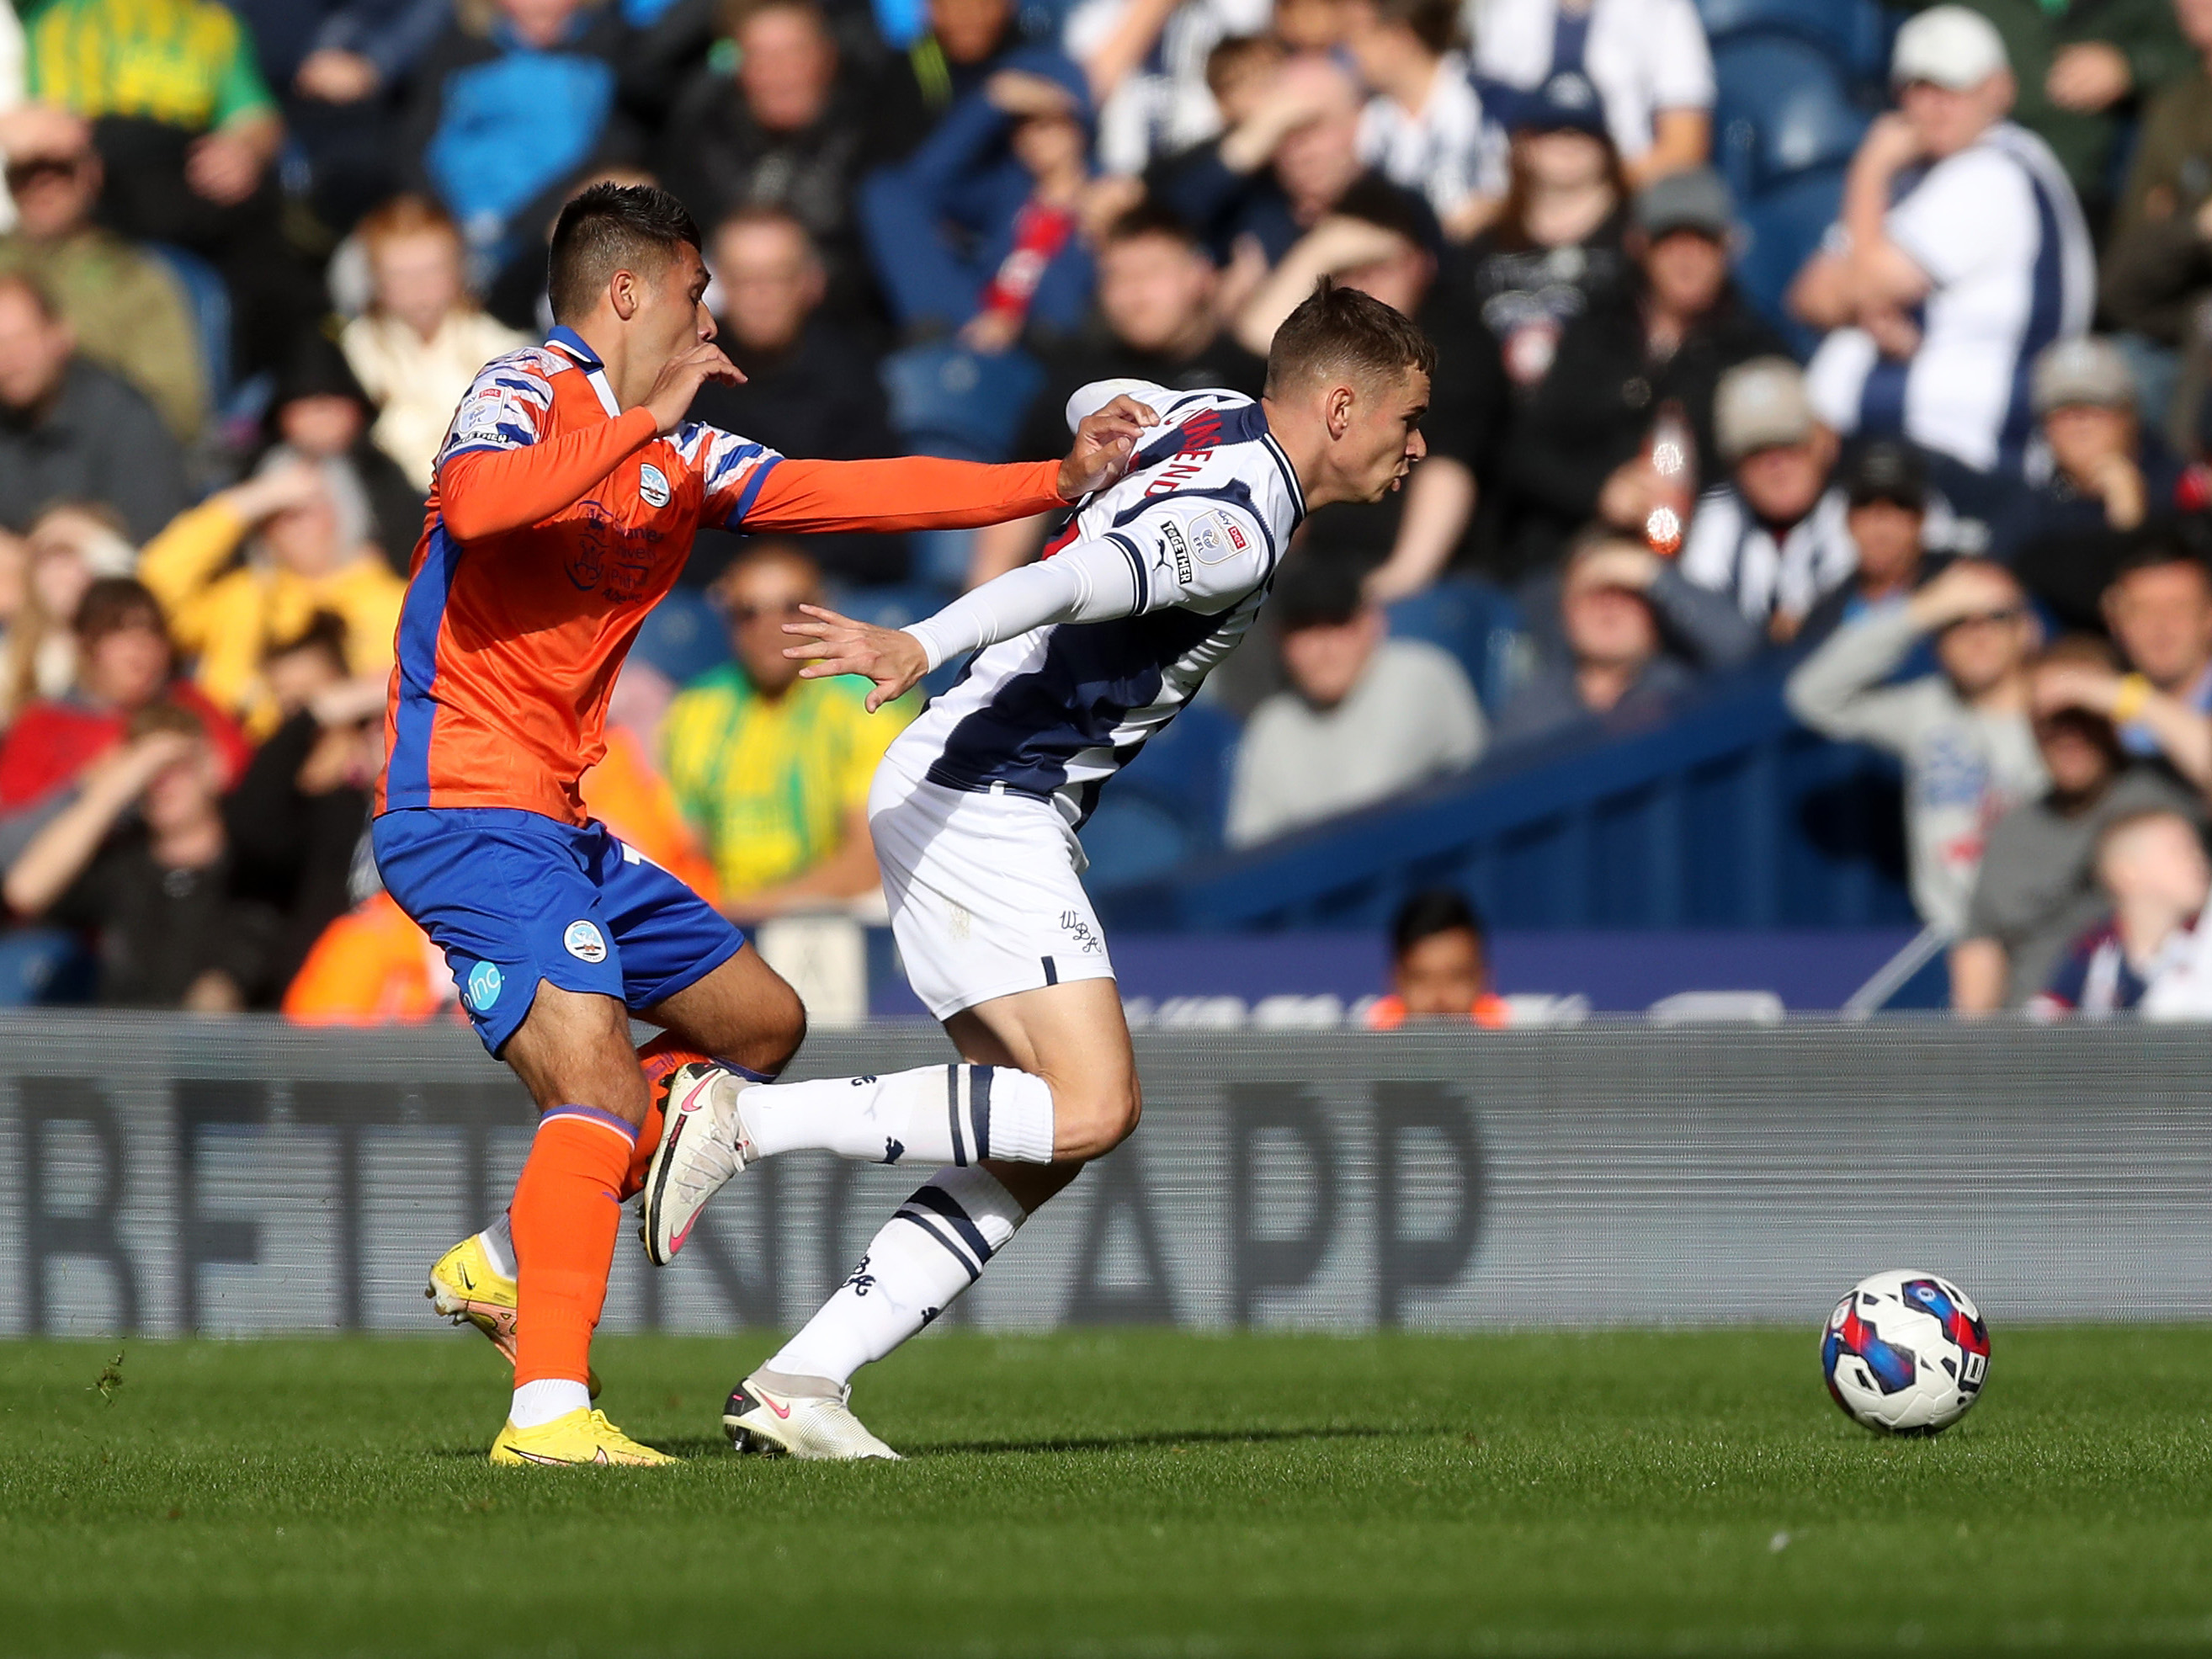 Conor Townsend in action against Swansea City